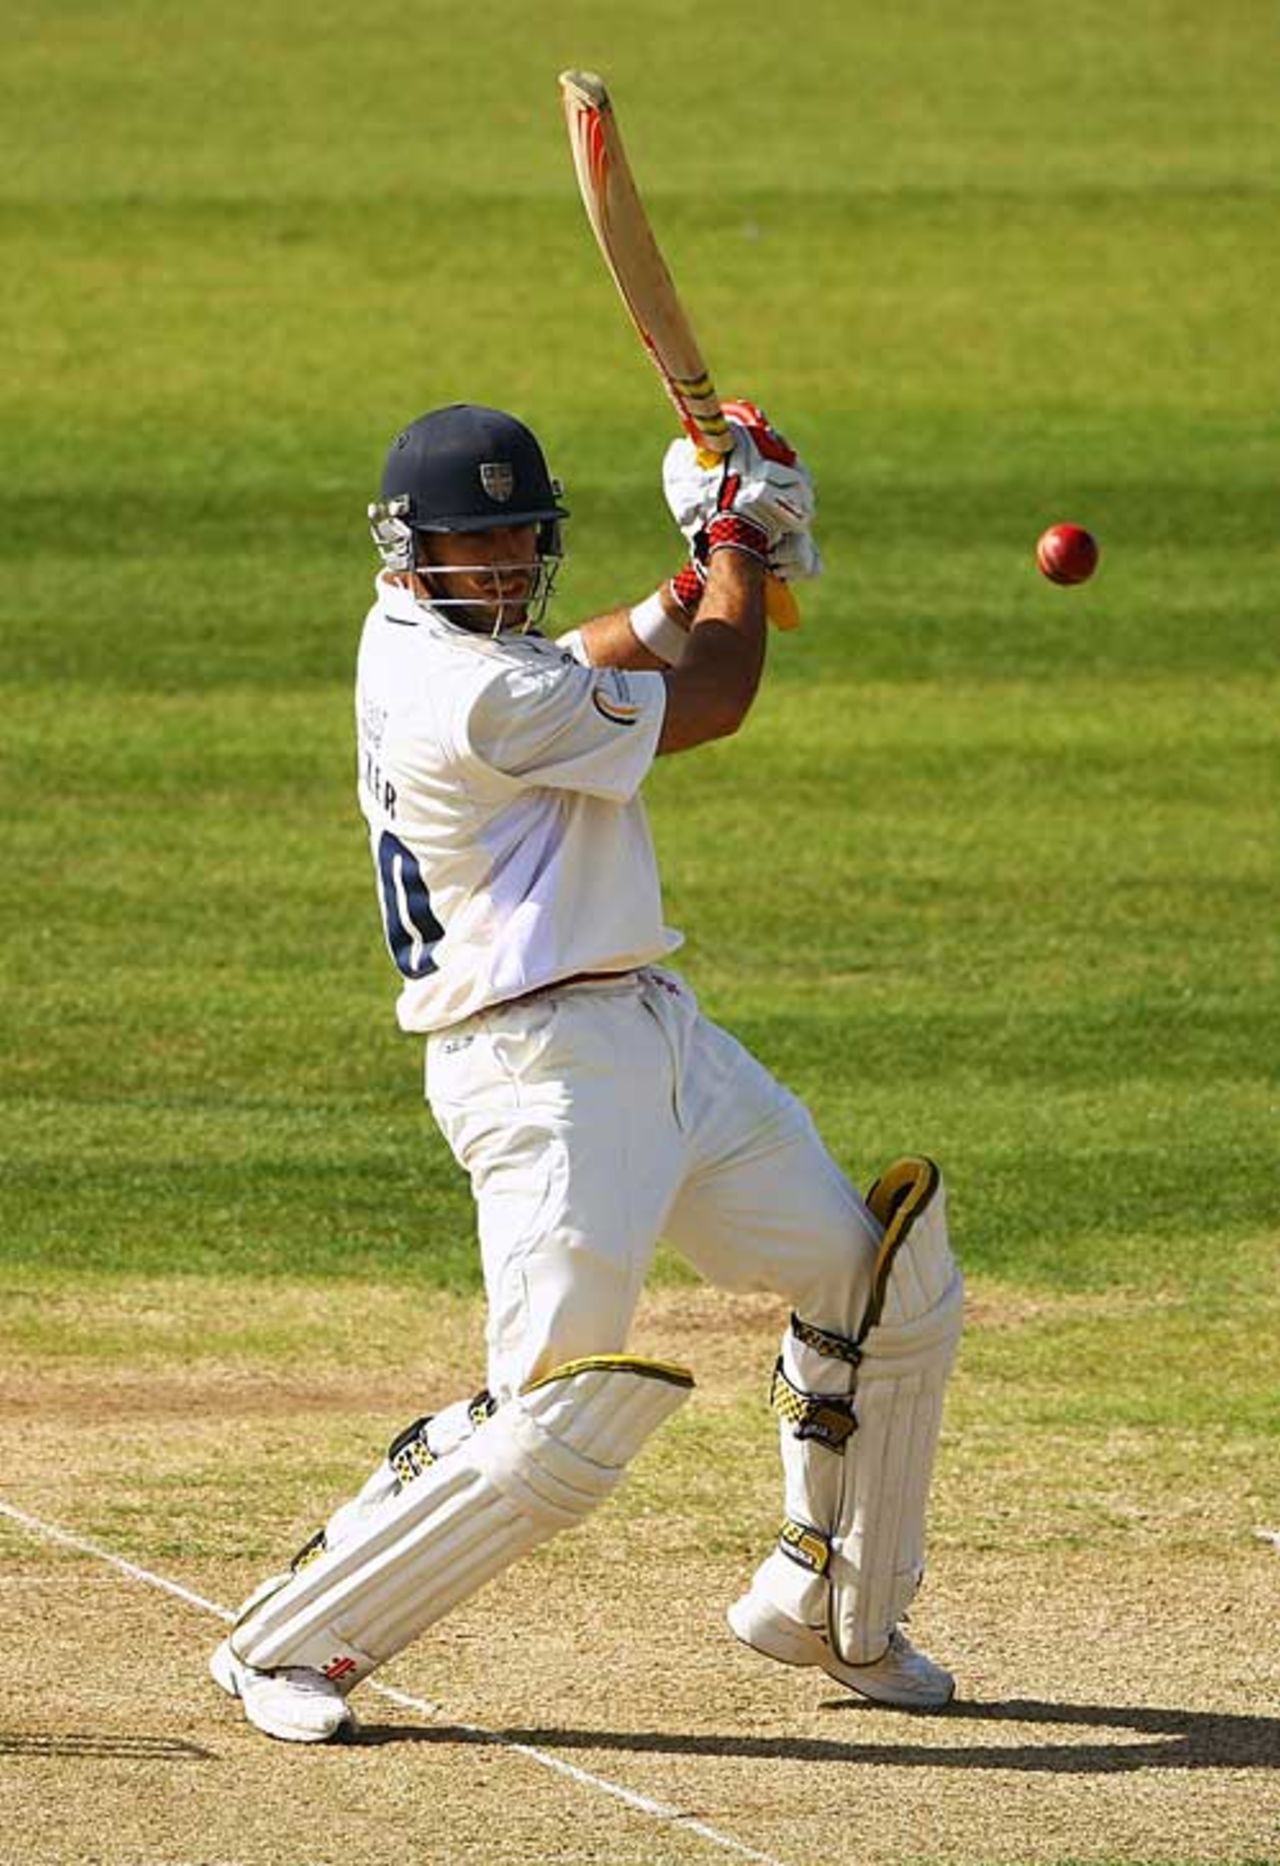 Kyle Coetzer collects another boundary during his hundred, Durham v Nottinghamshire, County Championship, 1st day, Chester-le-Street, September 9, 2009